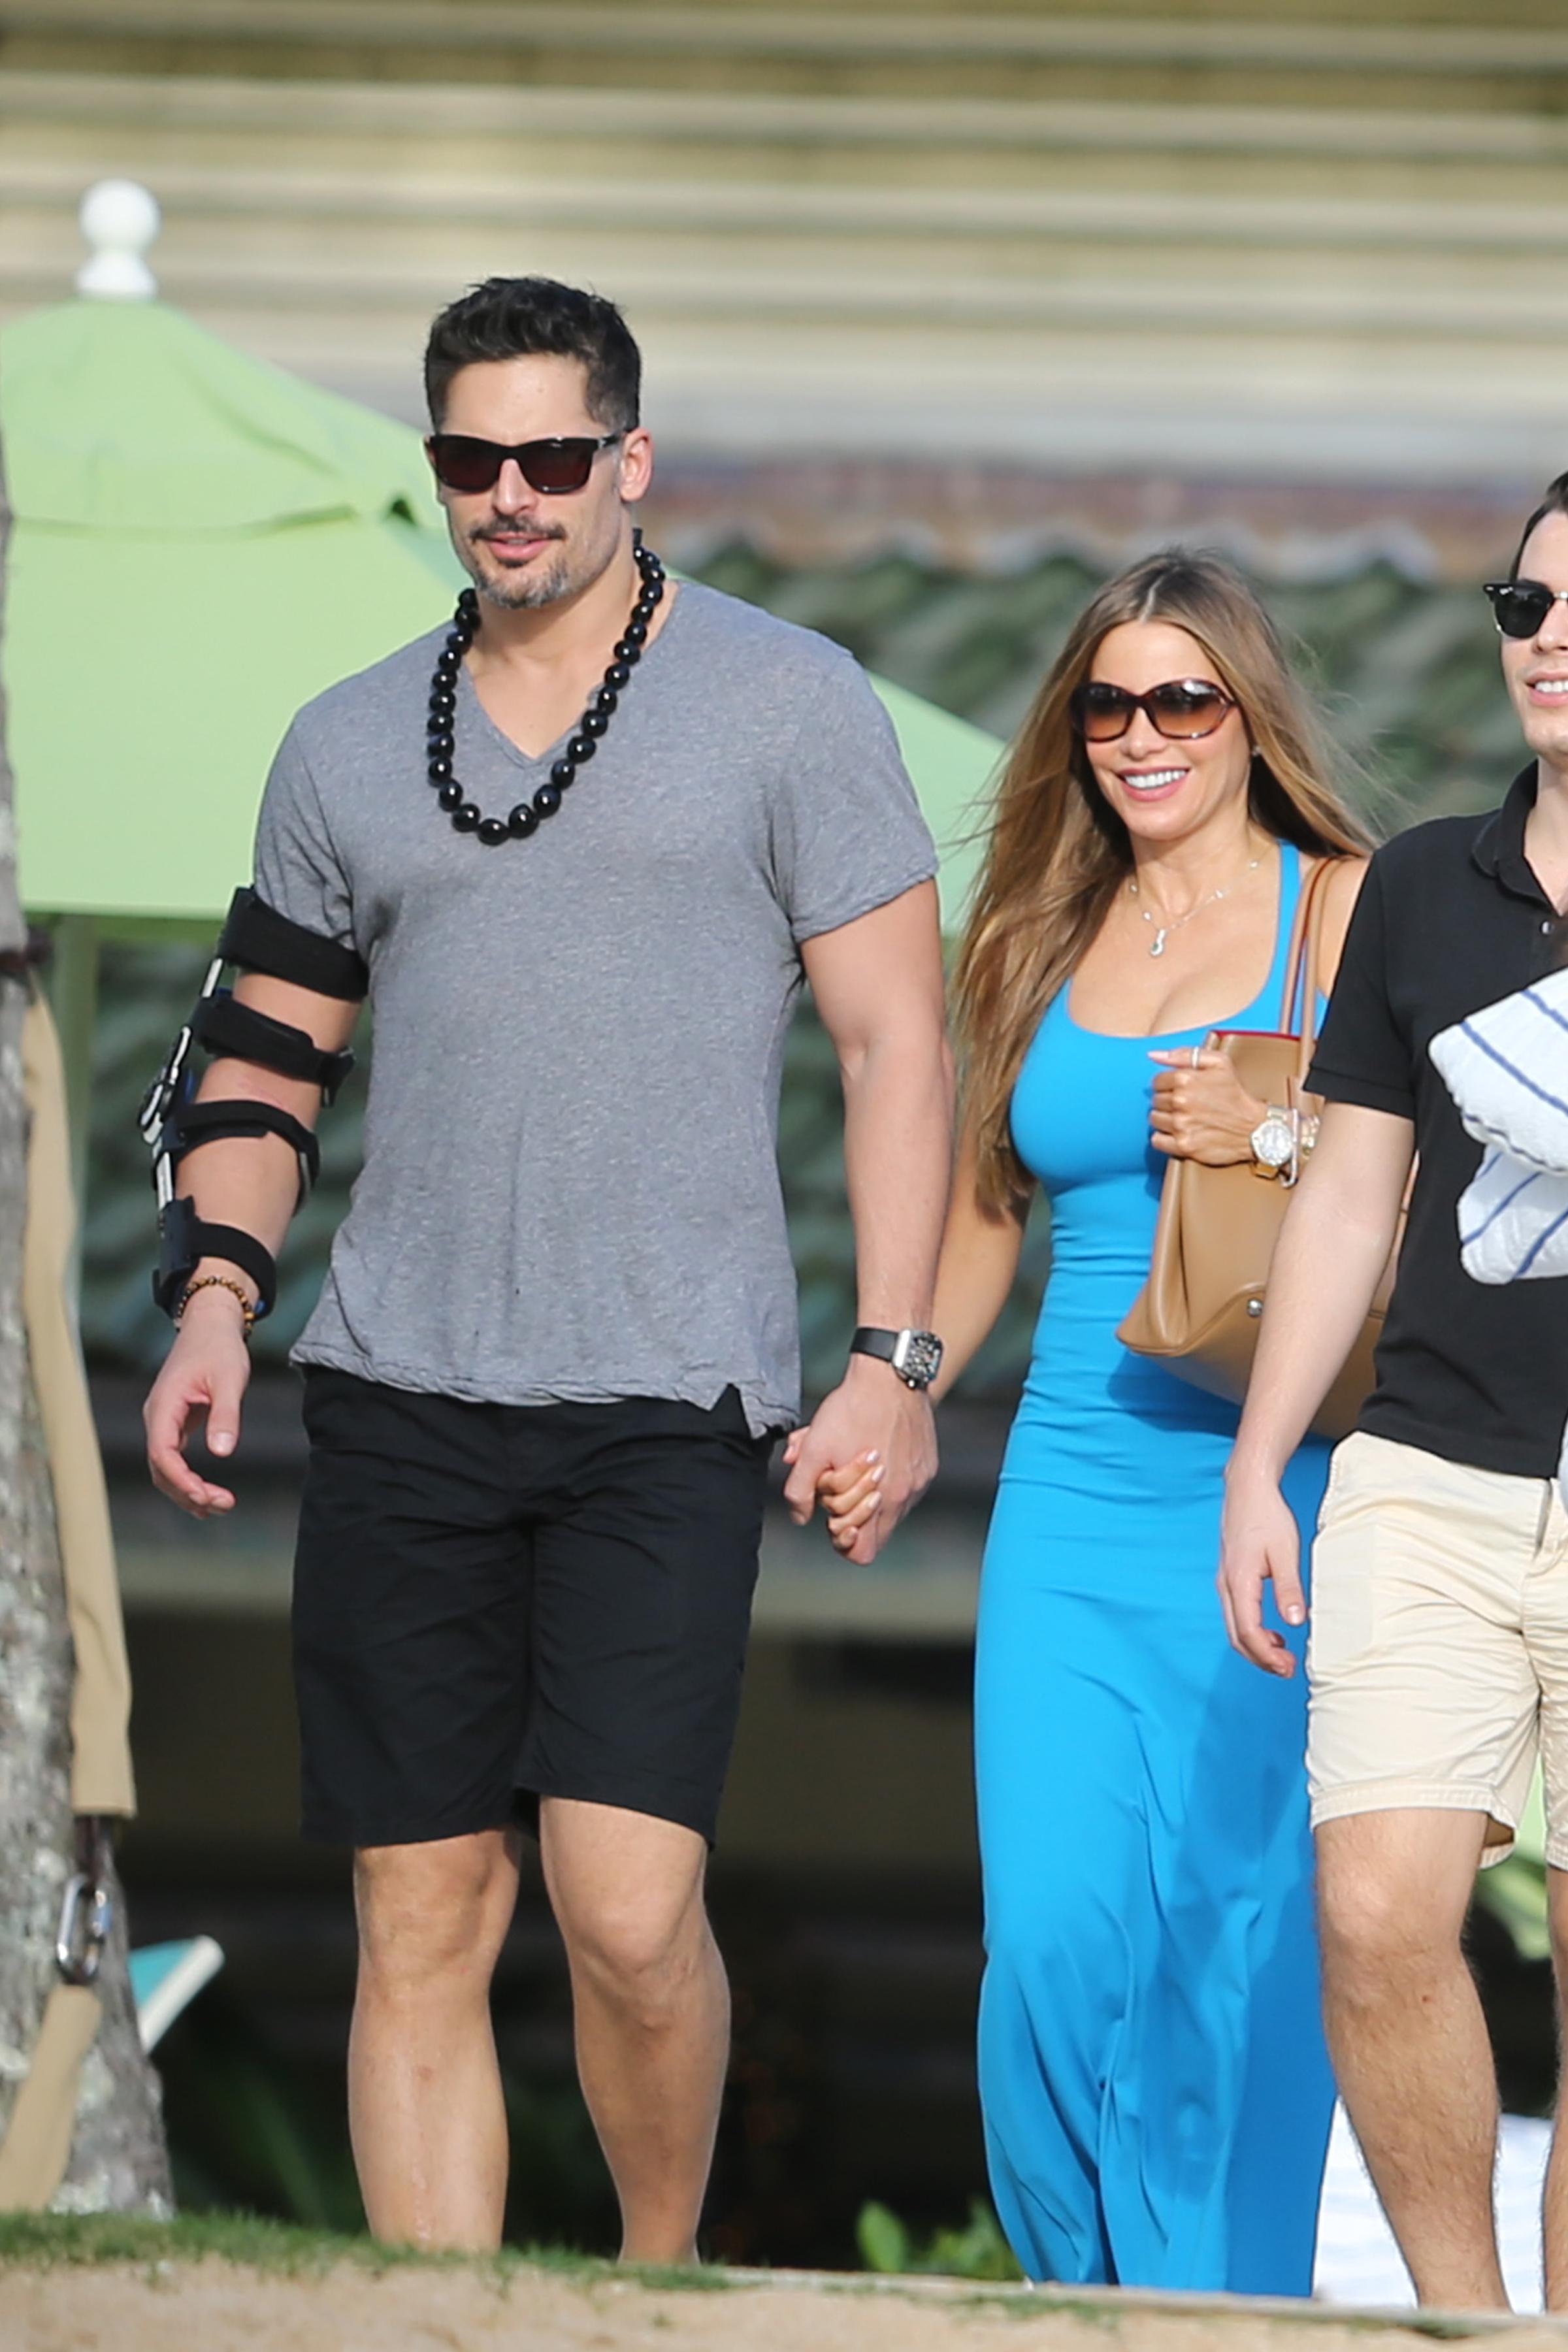 Sofia Vergara and Joe Manganiello look happy and in love as they hold hands while on vacation in Hawaii